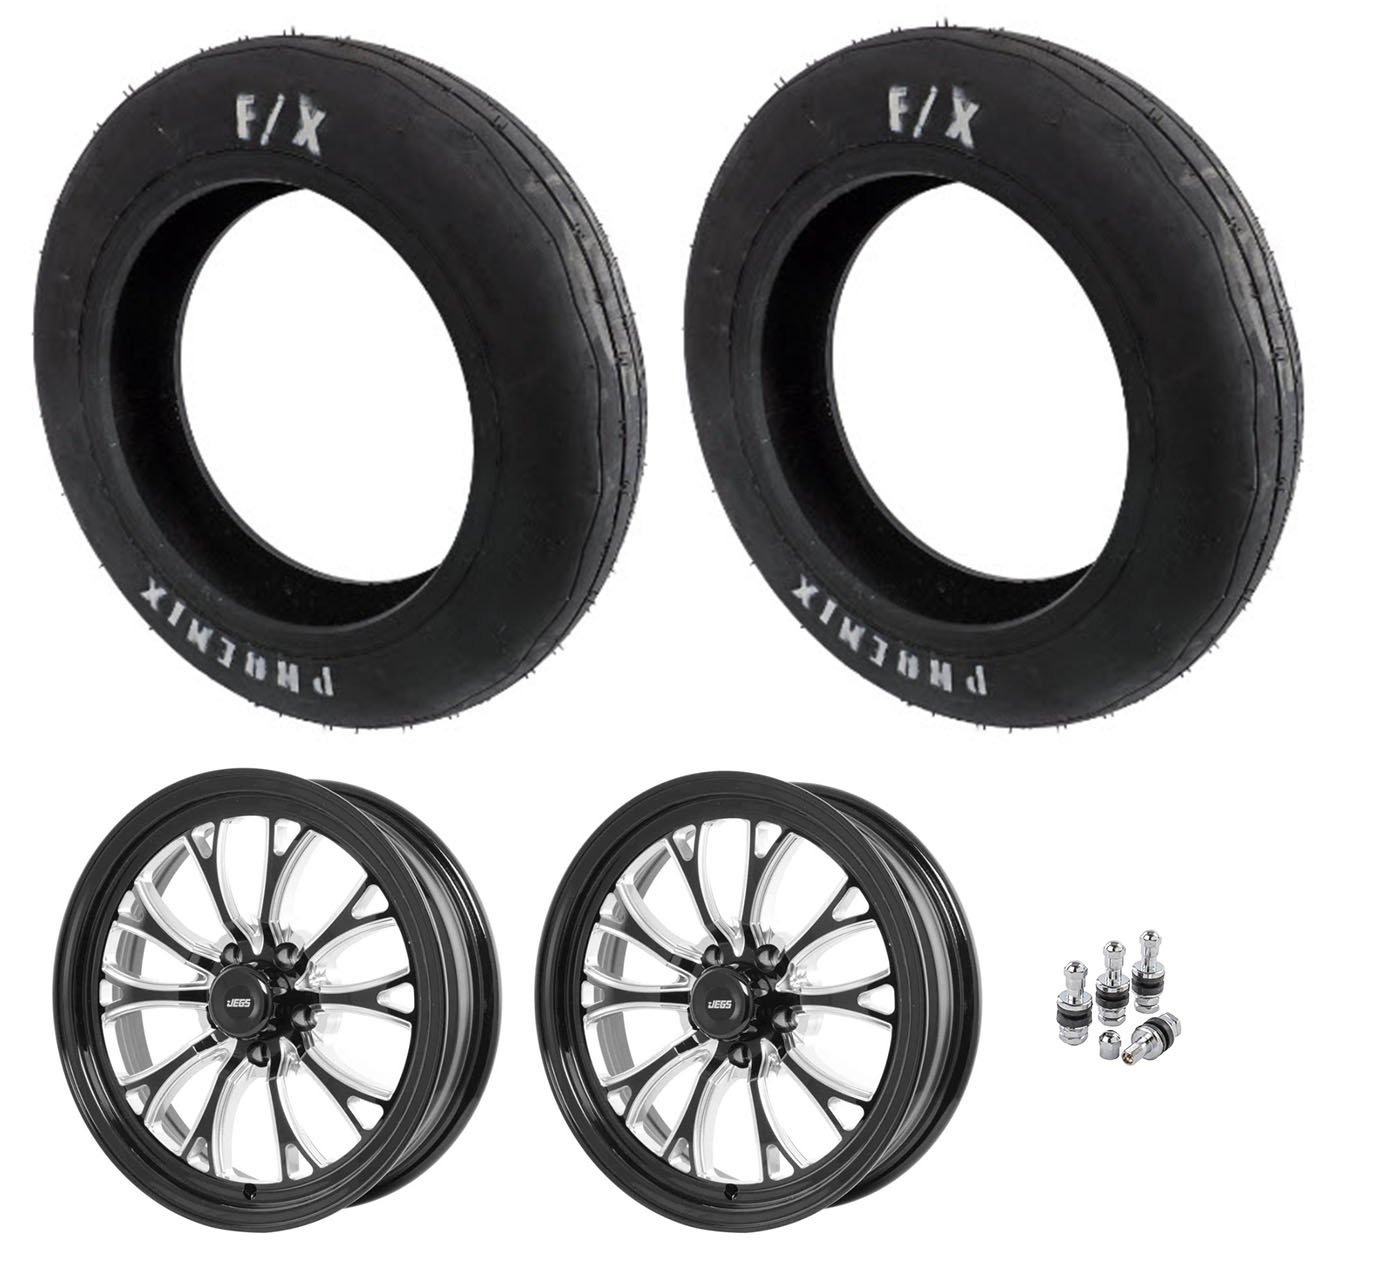 PH427 Front 27" Tires and JEGS SSR Spike Gloss Black Wheel Kit w/5 x 5.00" Wheel Bolt Pattern